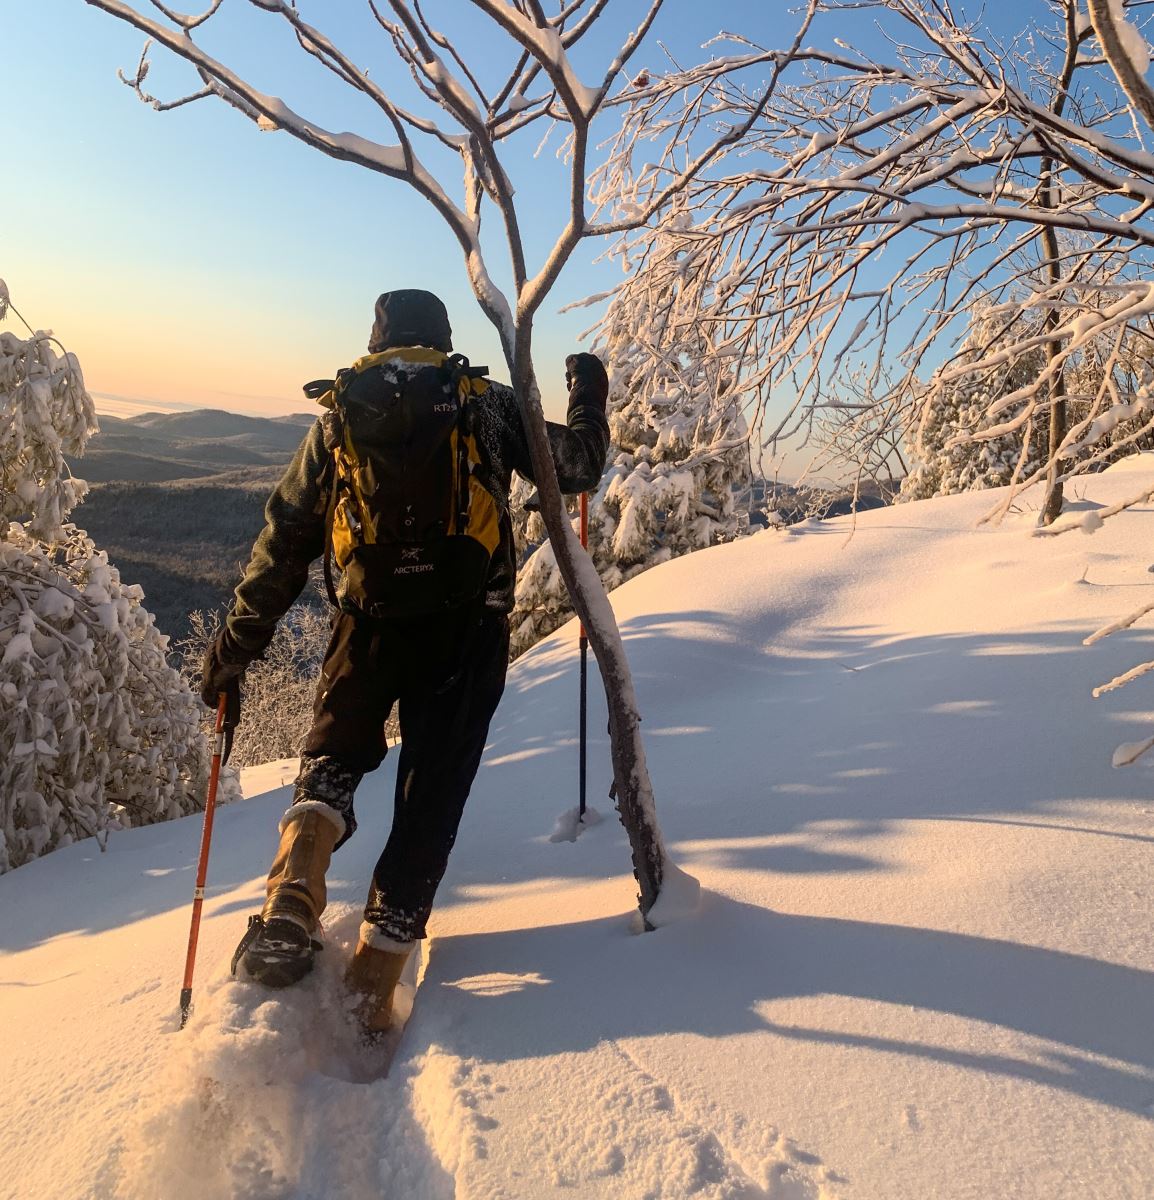 Champlain Area Trails Launches Snowshoe Drive to Increase Winter Accessibility for All